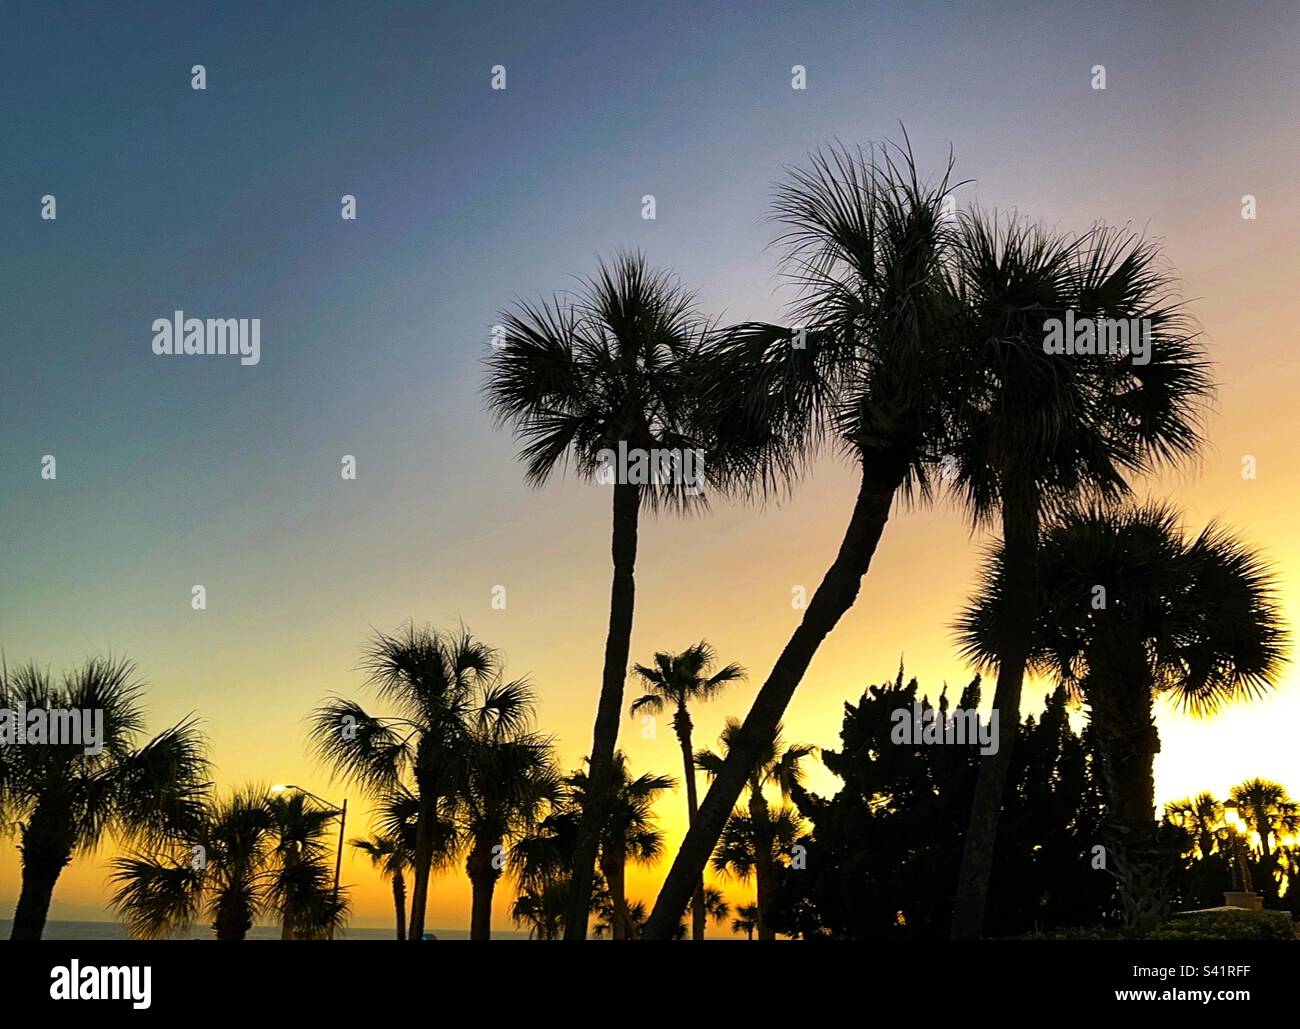 Tropical palm trees silhouetted against a colourful sunset sky. No people. Stock Photo